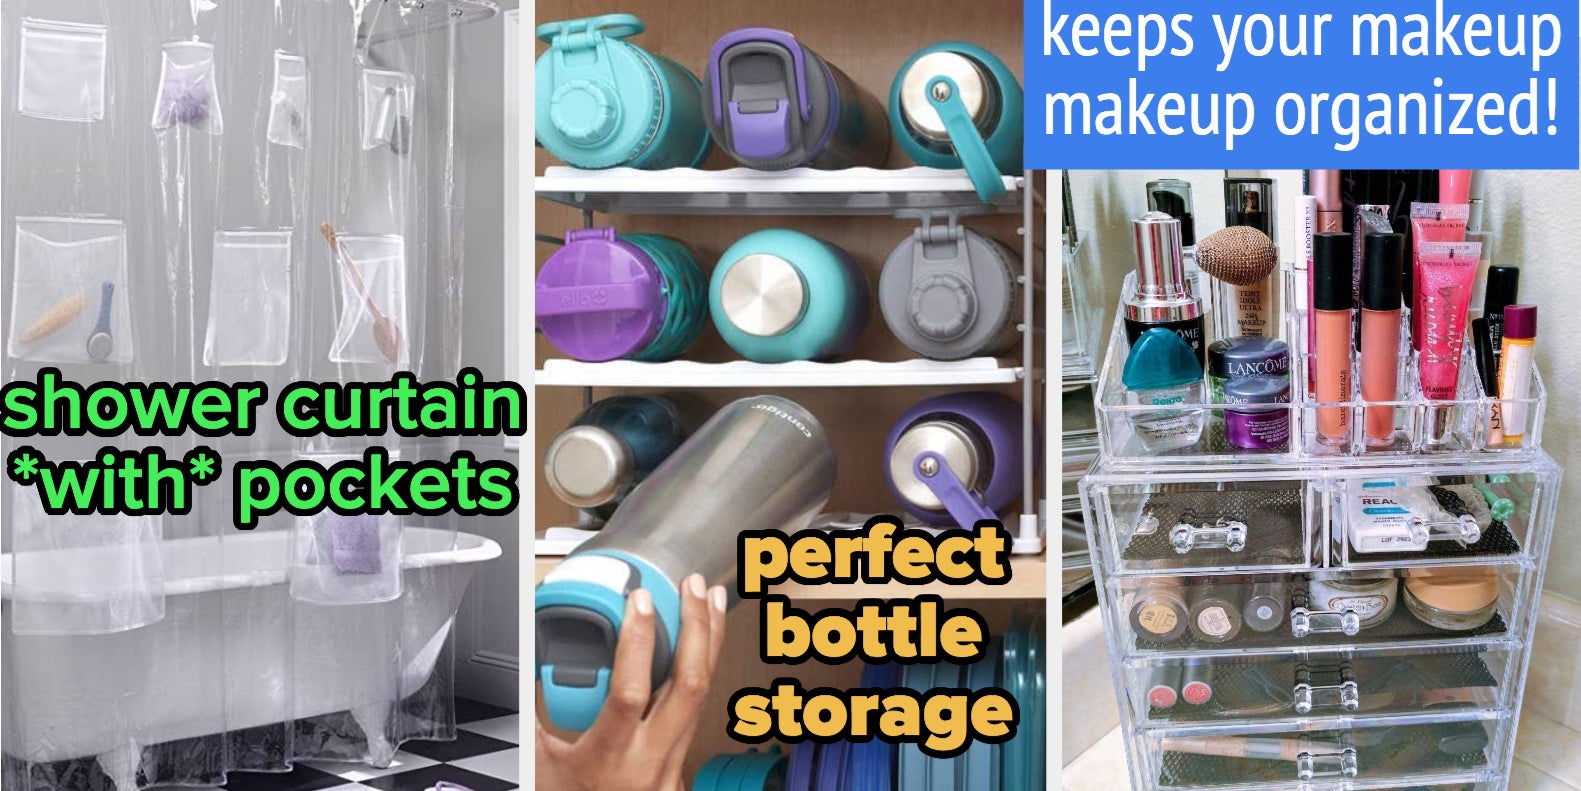 12 Things Professional Organizers Would Never Do